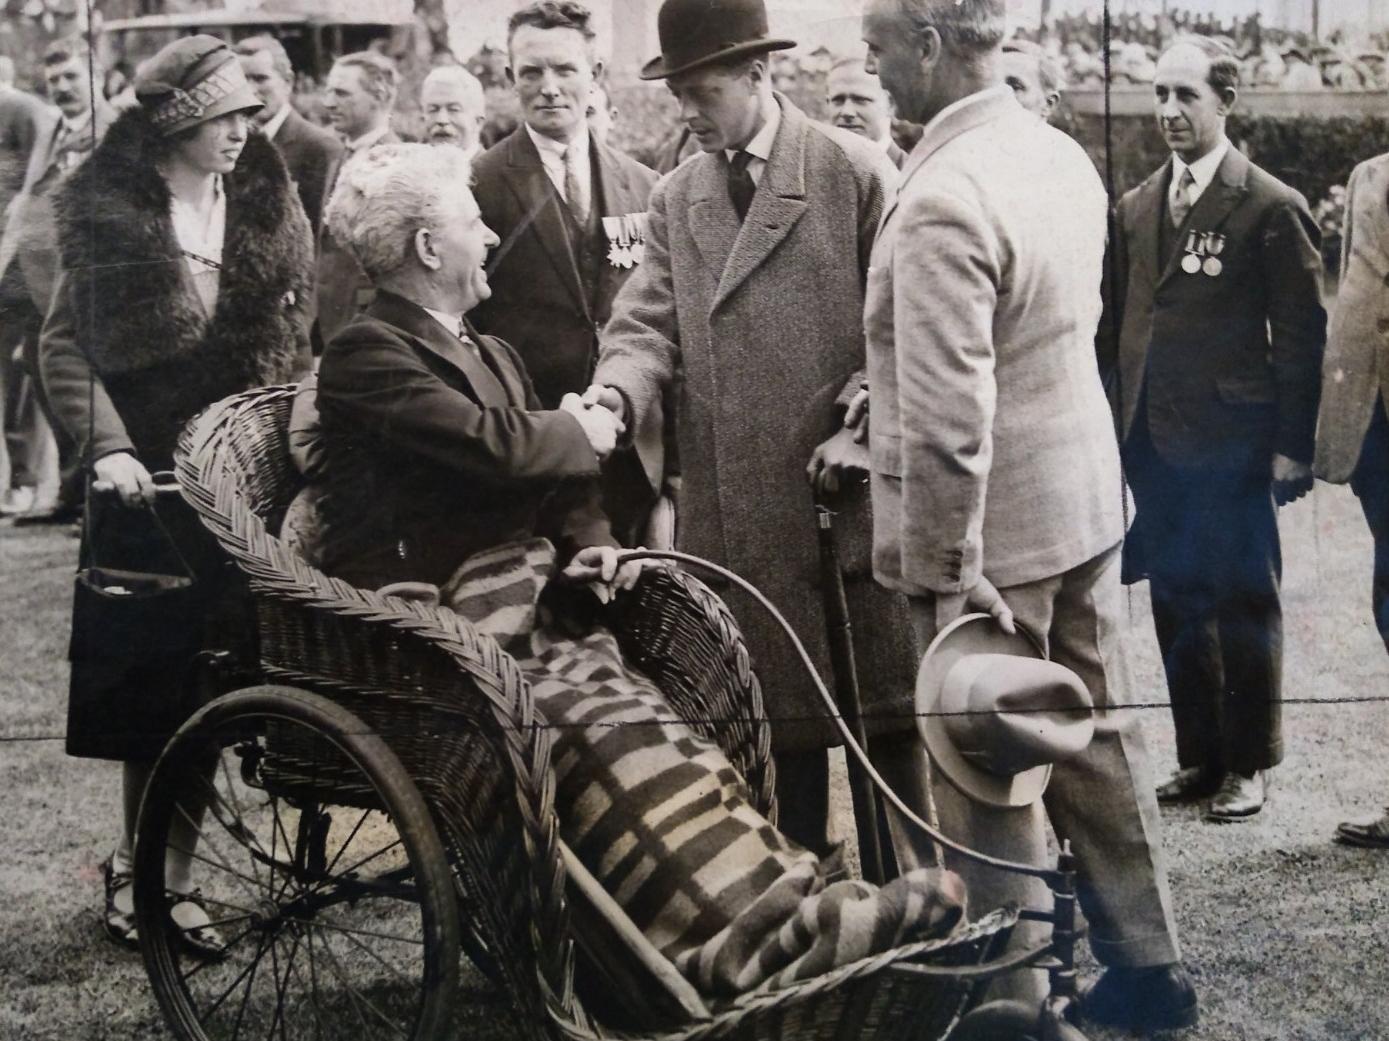 The Prince of Wales, later the Duke of Windsor, meets ex-servicemen from the First World War during his visit to the Fylde in 1927